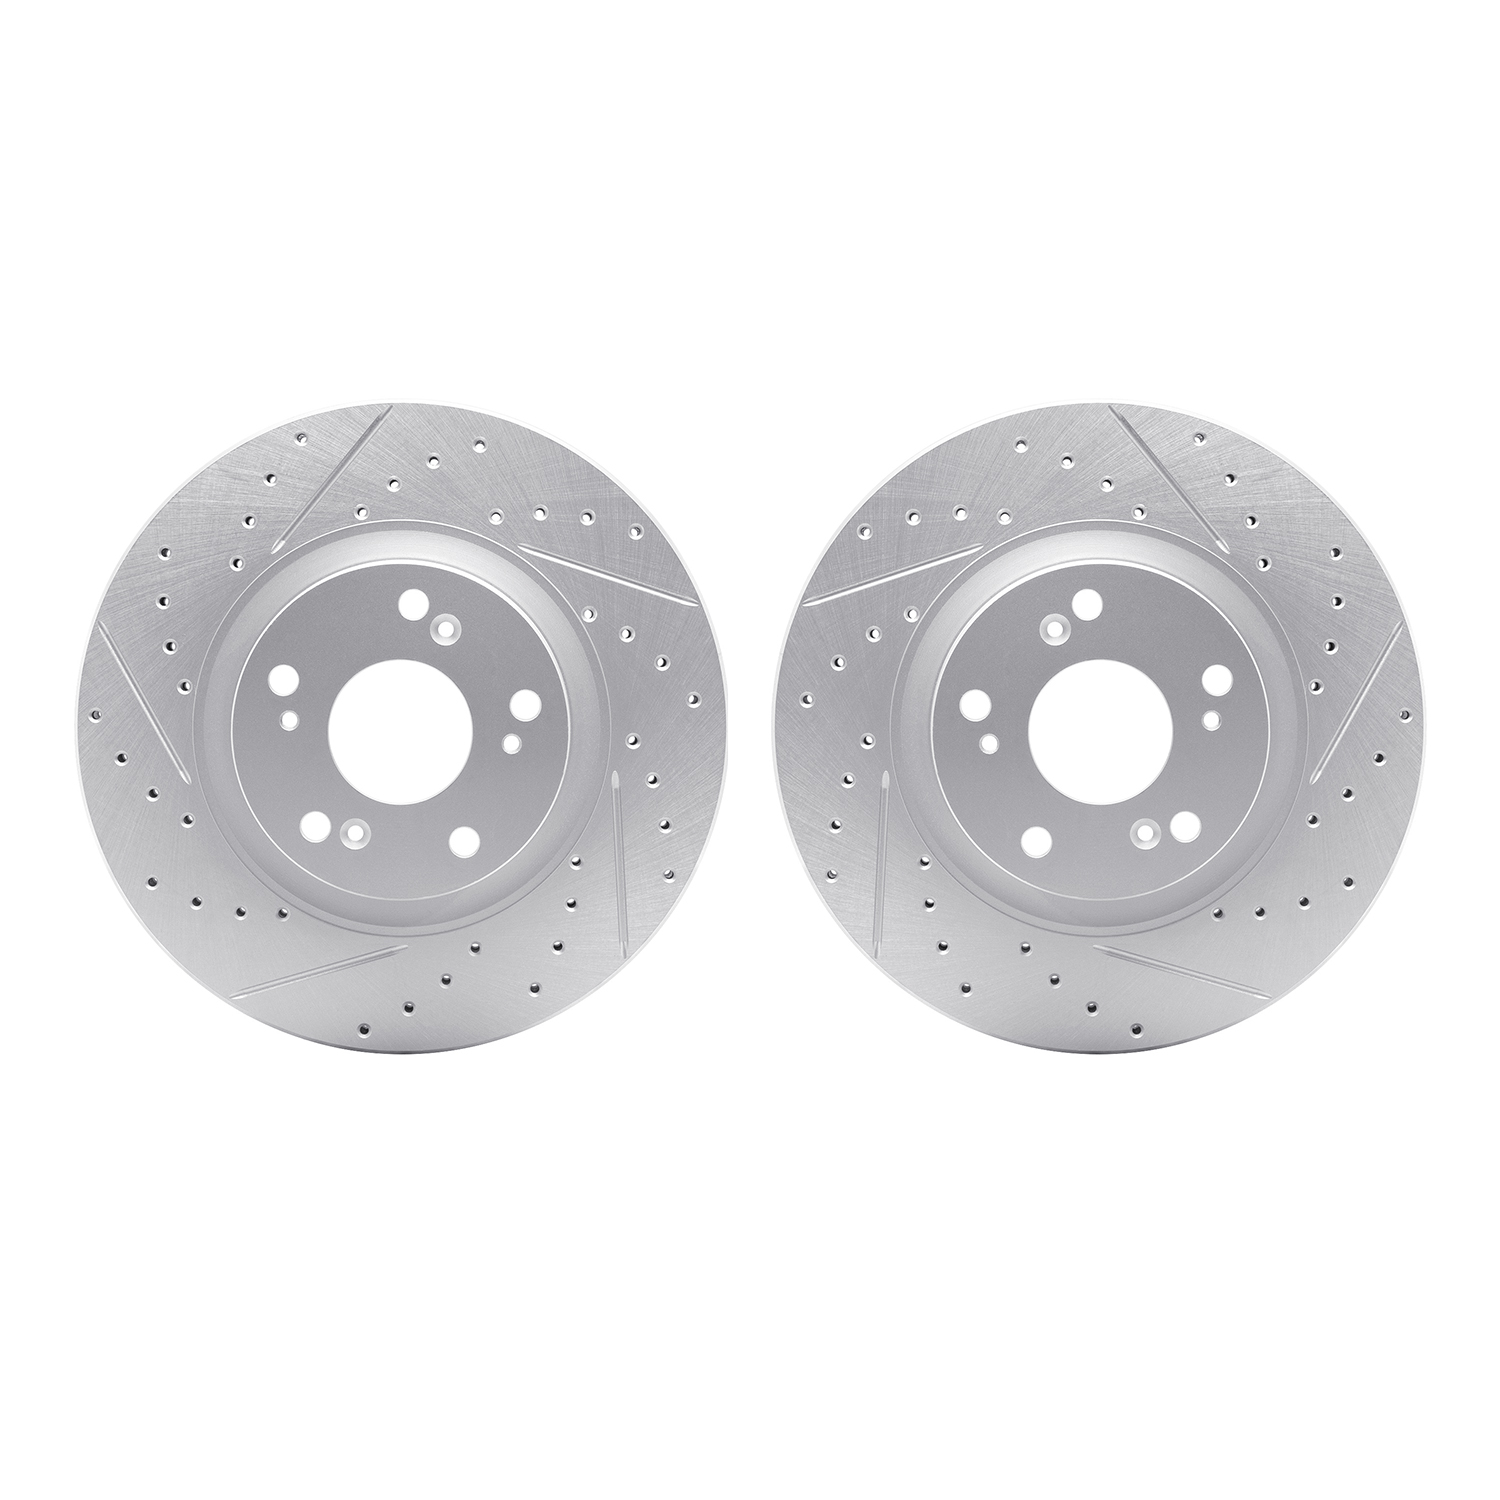 2002-59004 Geoperformance Drilled/Slotted Brake Rotors, 2002-2015 Acura/Honda, Position: Front